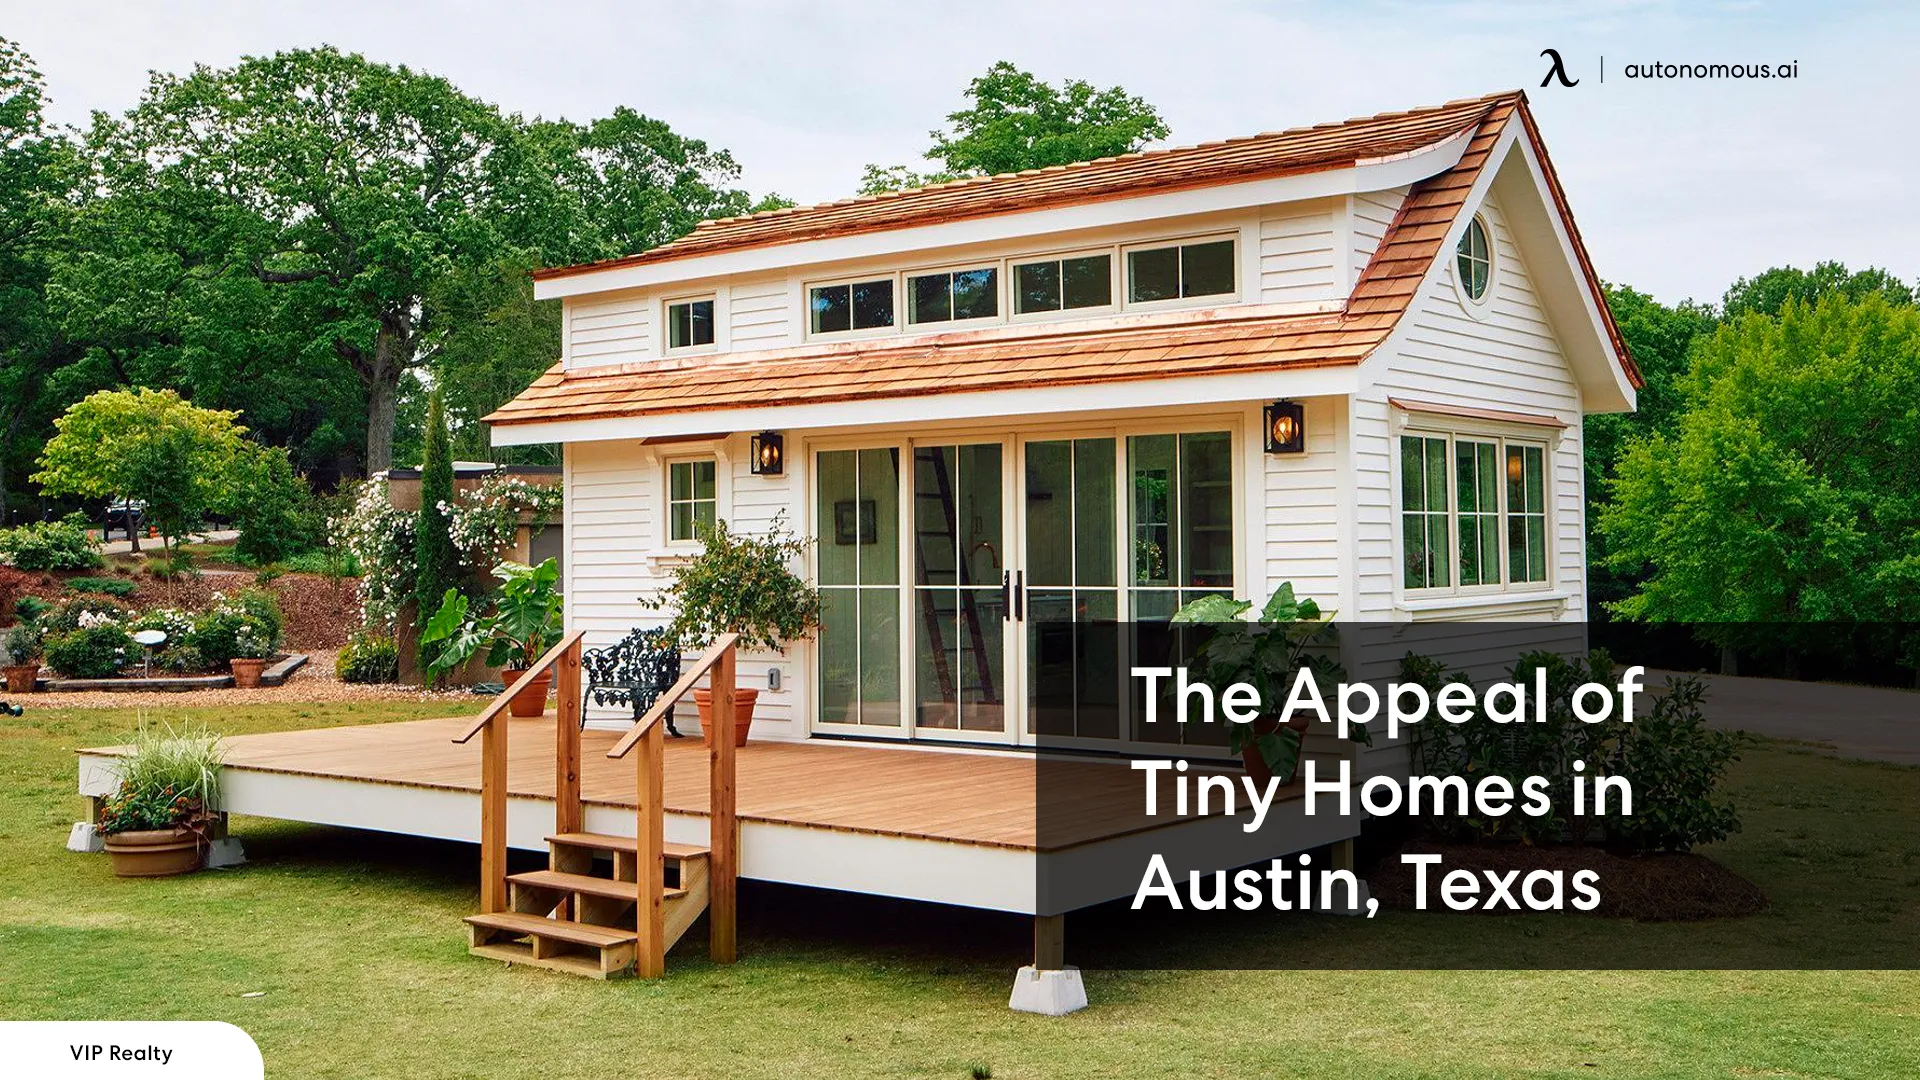 Austin, Texas Tiny Homes: Living Small in the Lone Star State